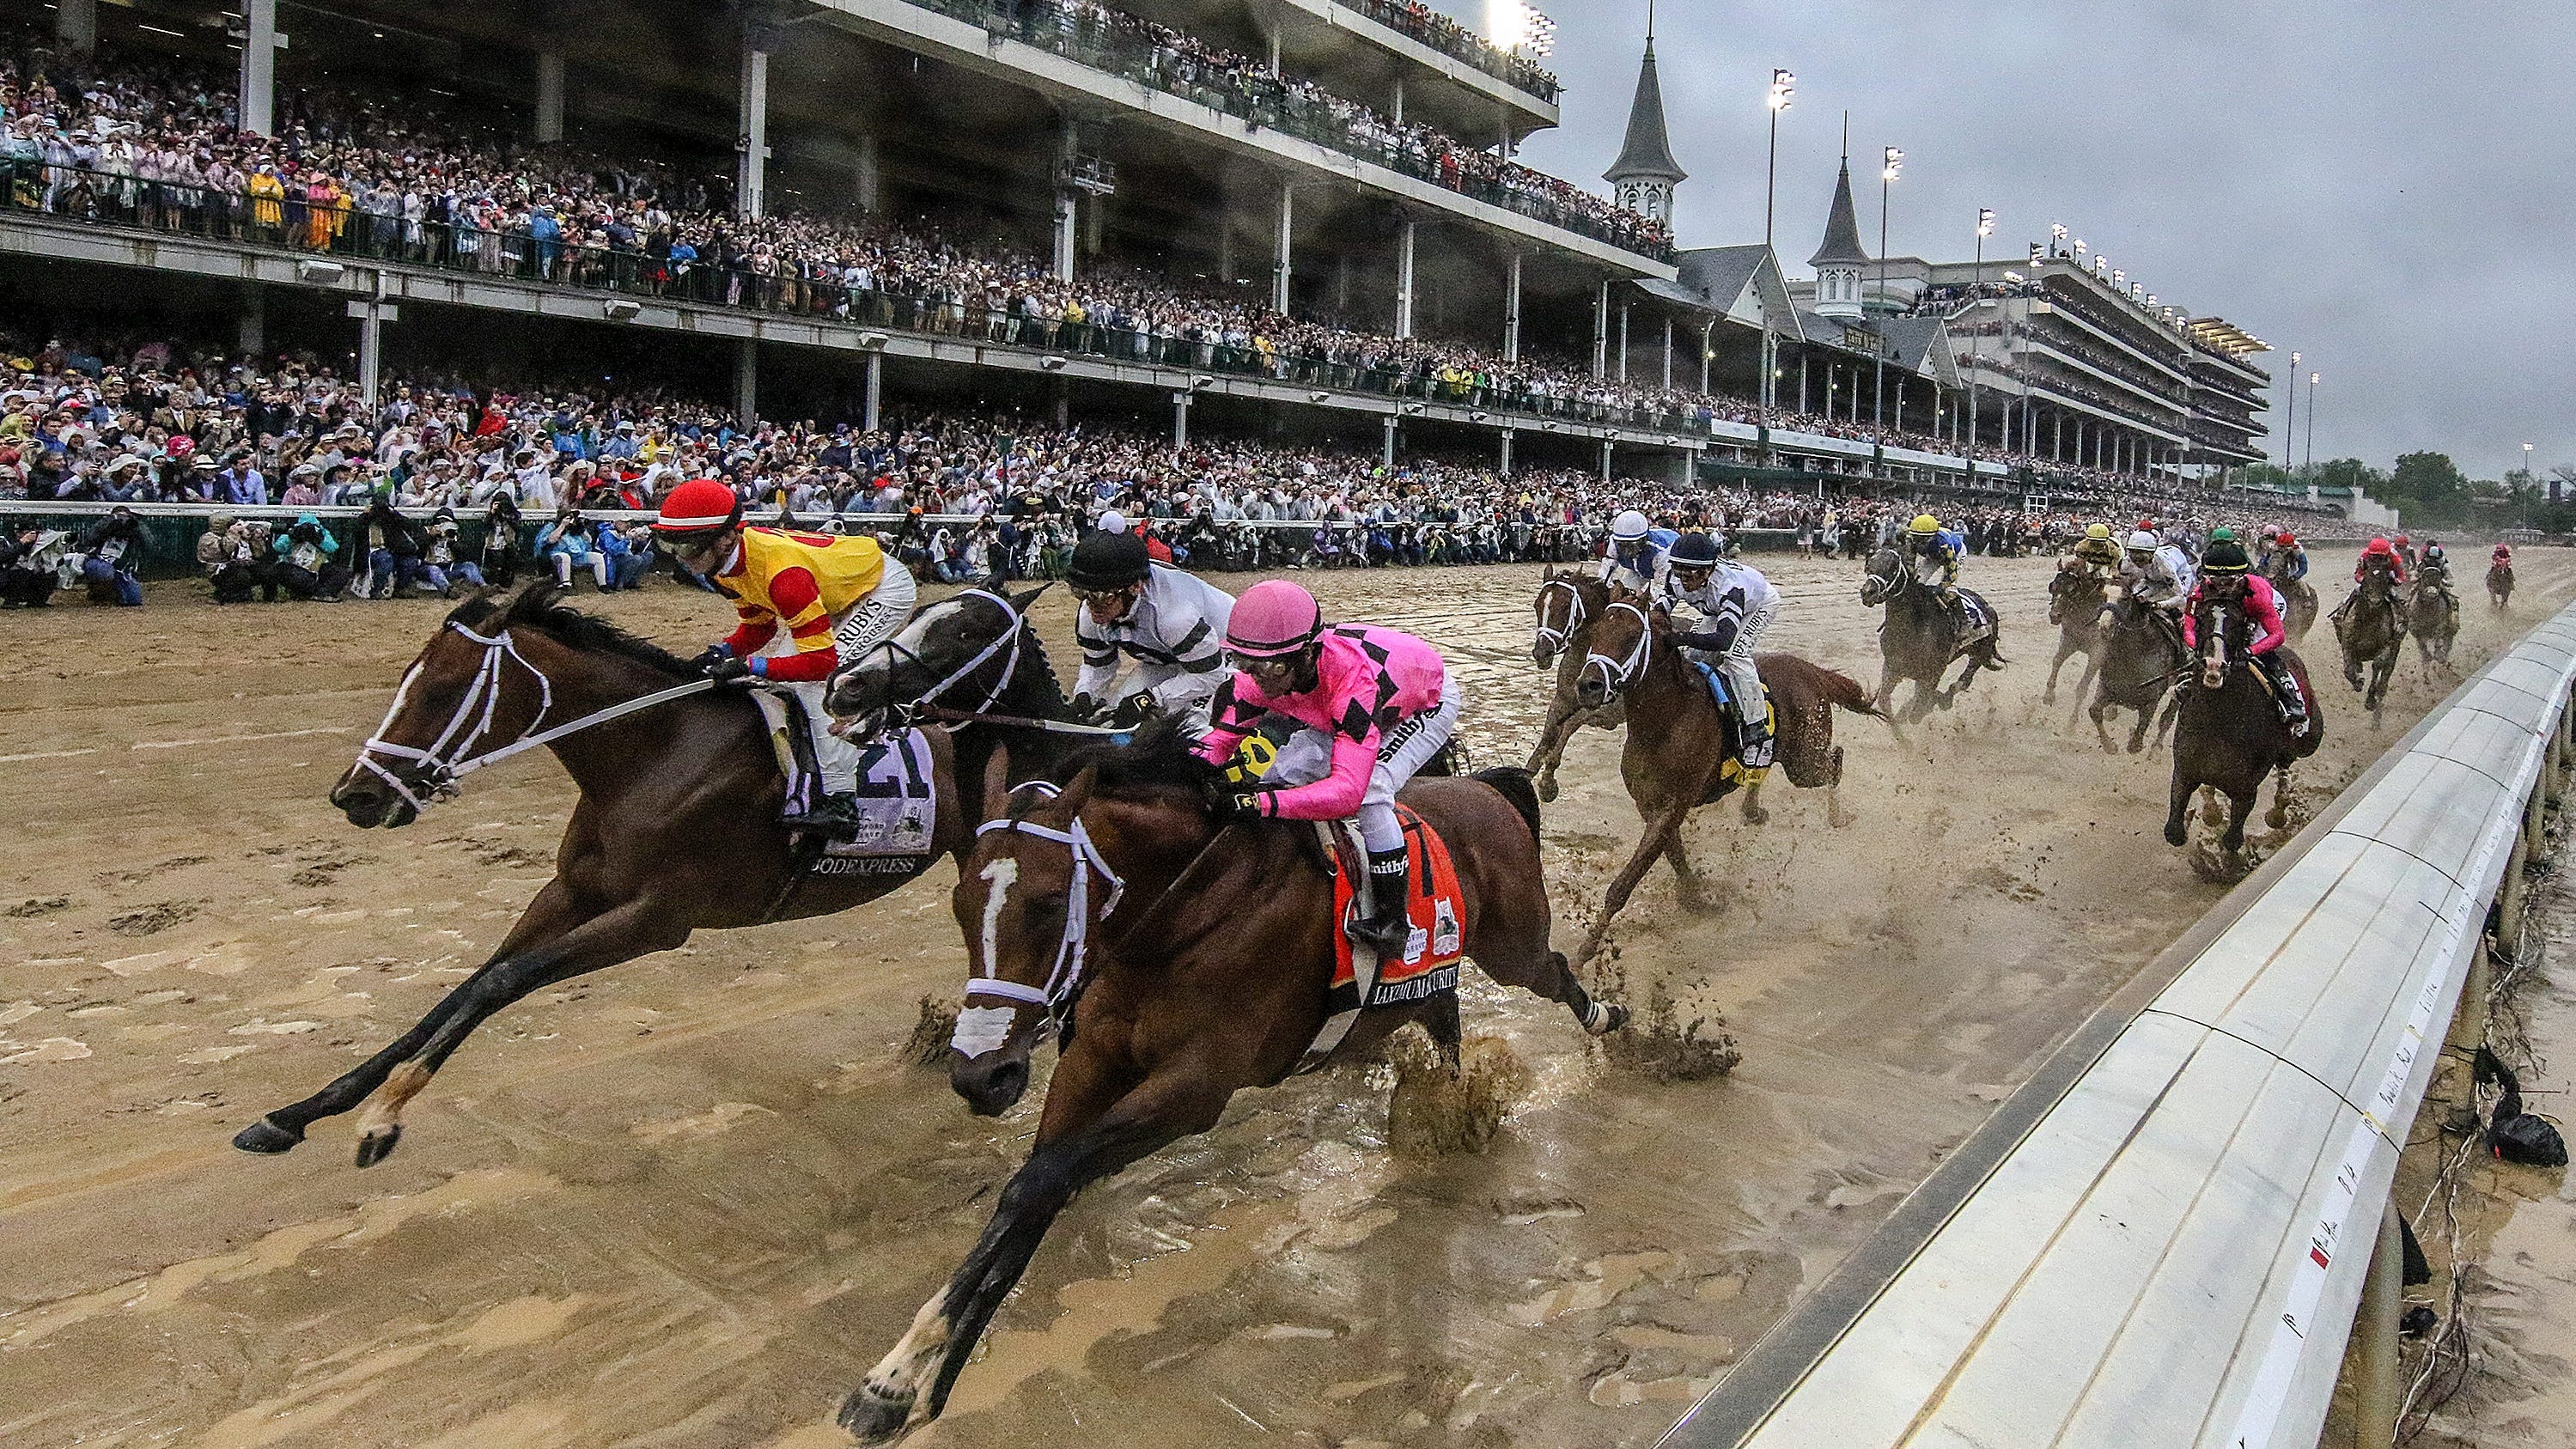 Kentucky Derby 2020 Churchill Downs to host virtual race on May 2